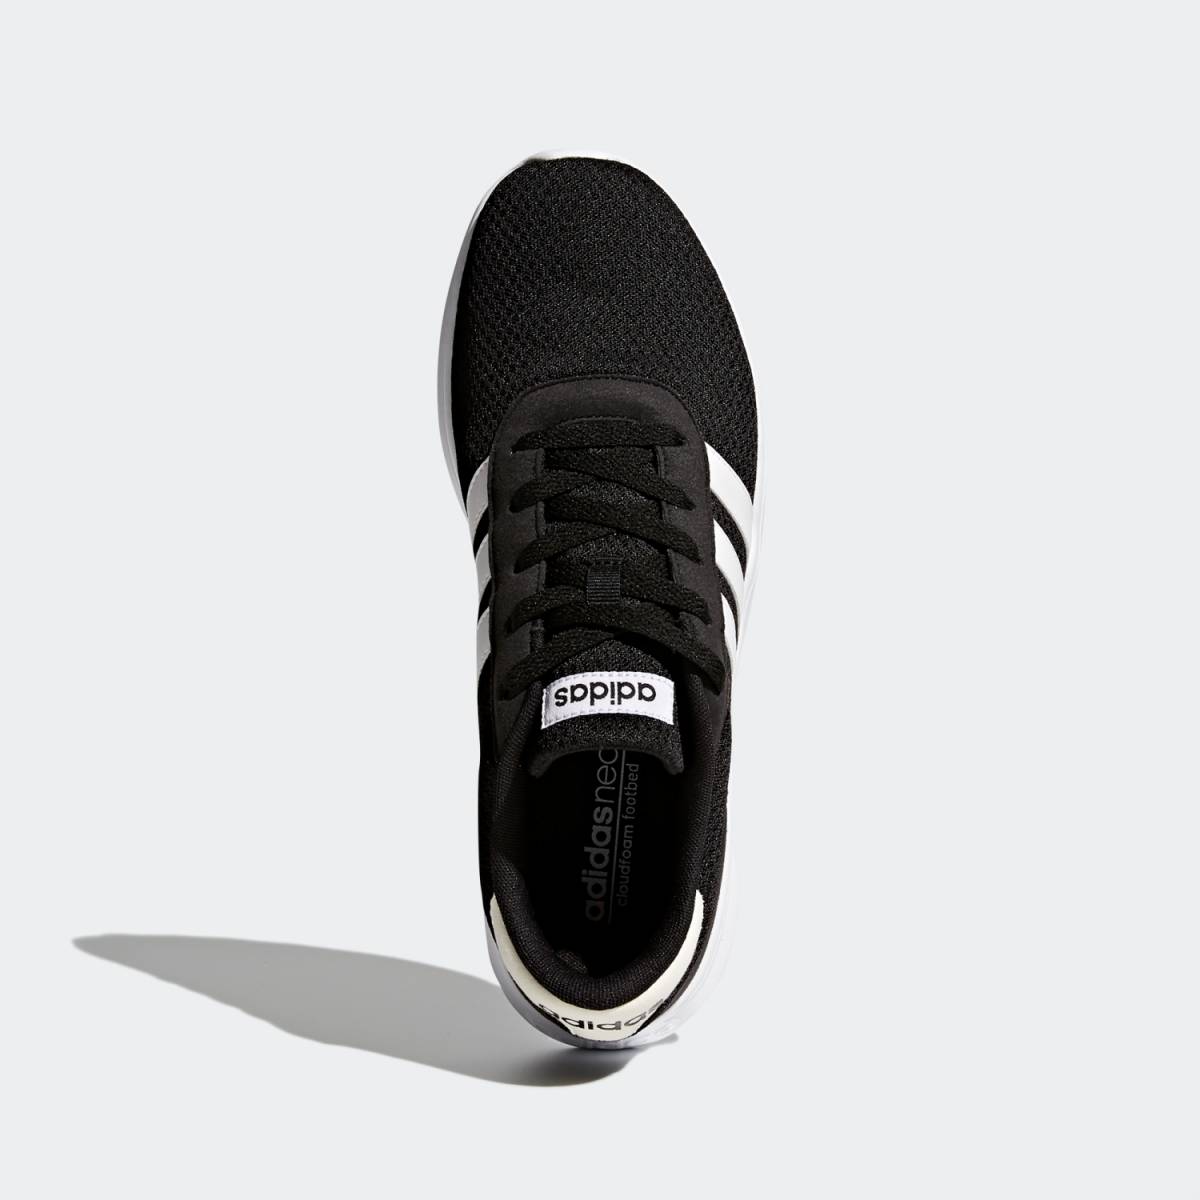 ADIDAS NEO LITE RACER SHOES - BB9774